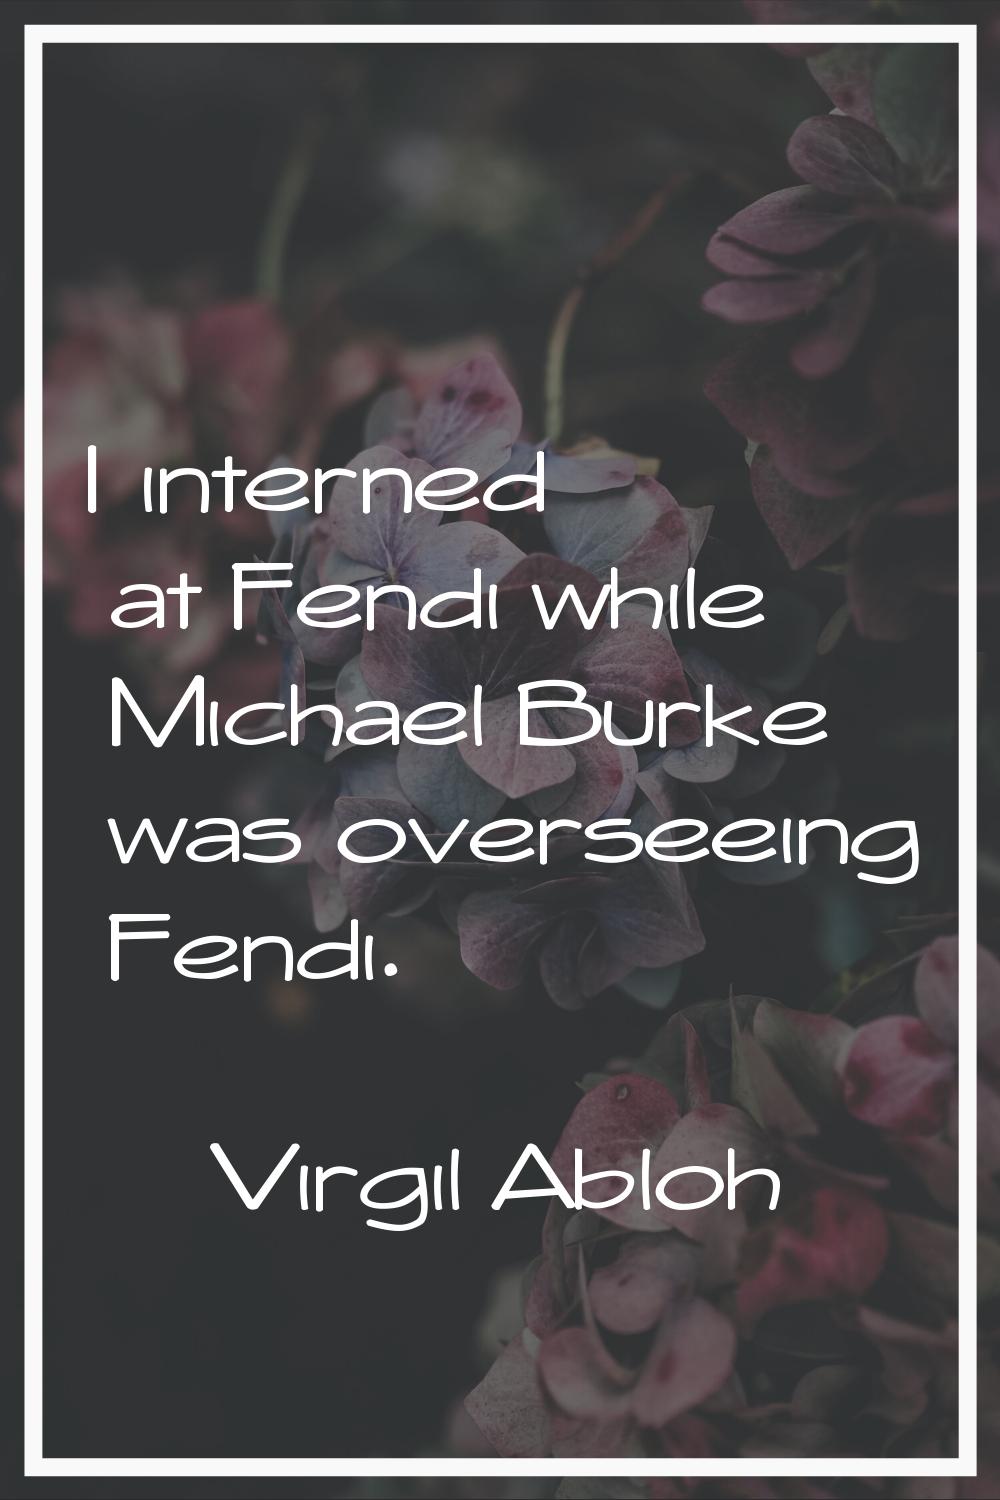 I interned at Fendi while Michael Burke was overseeing Fendi.